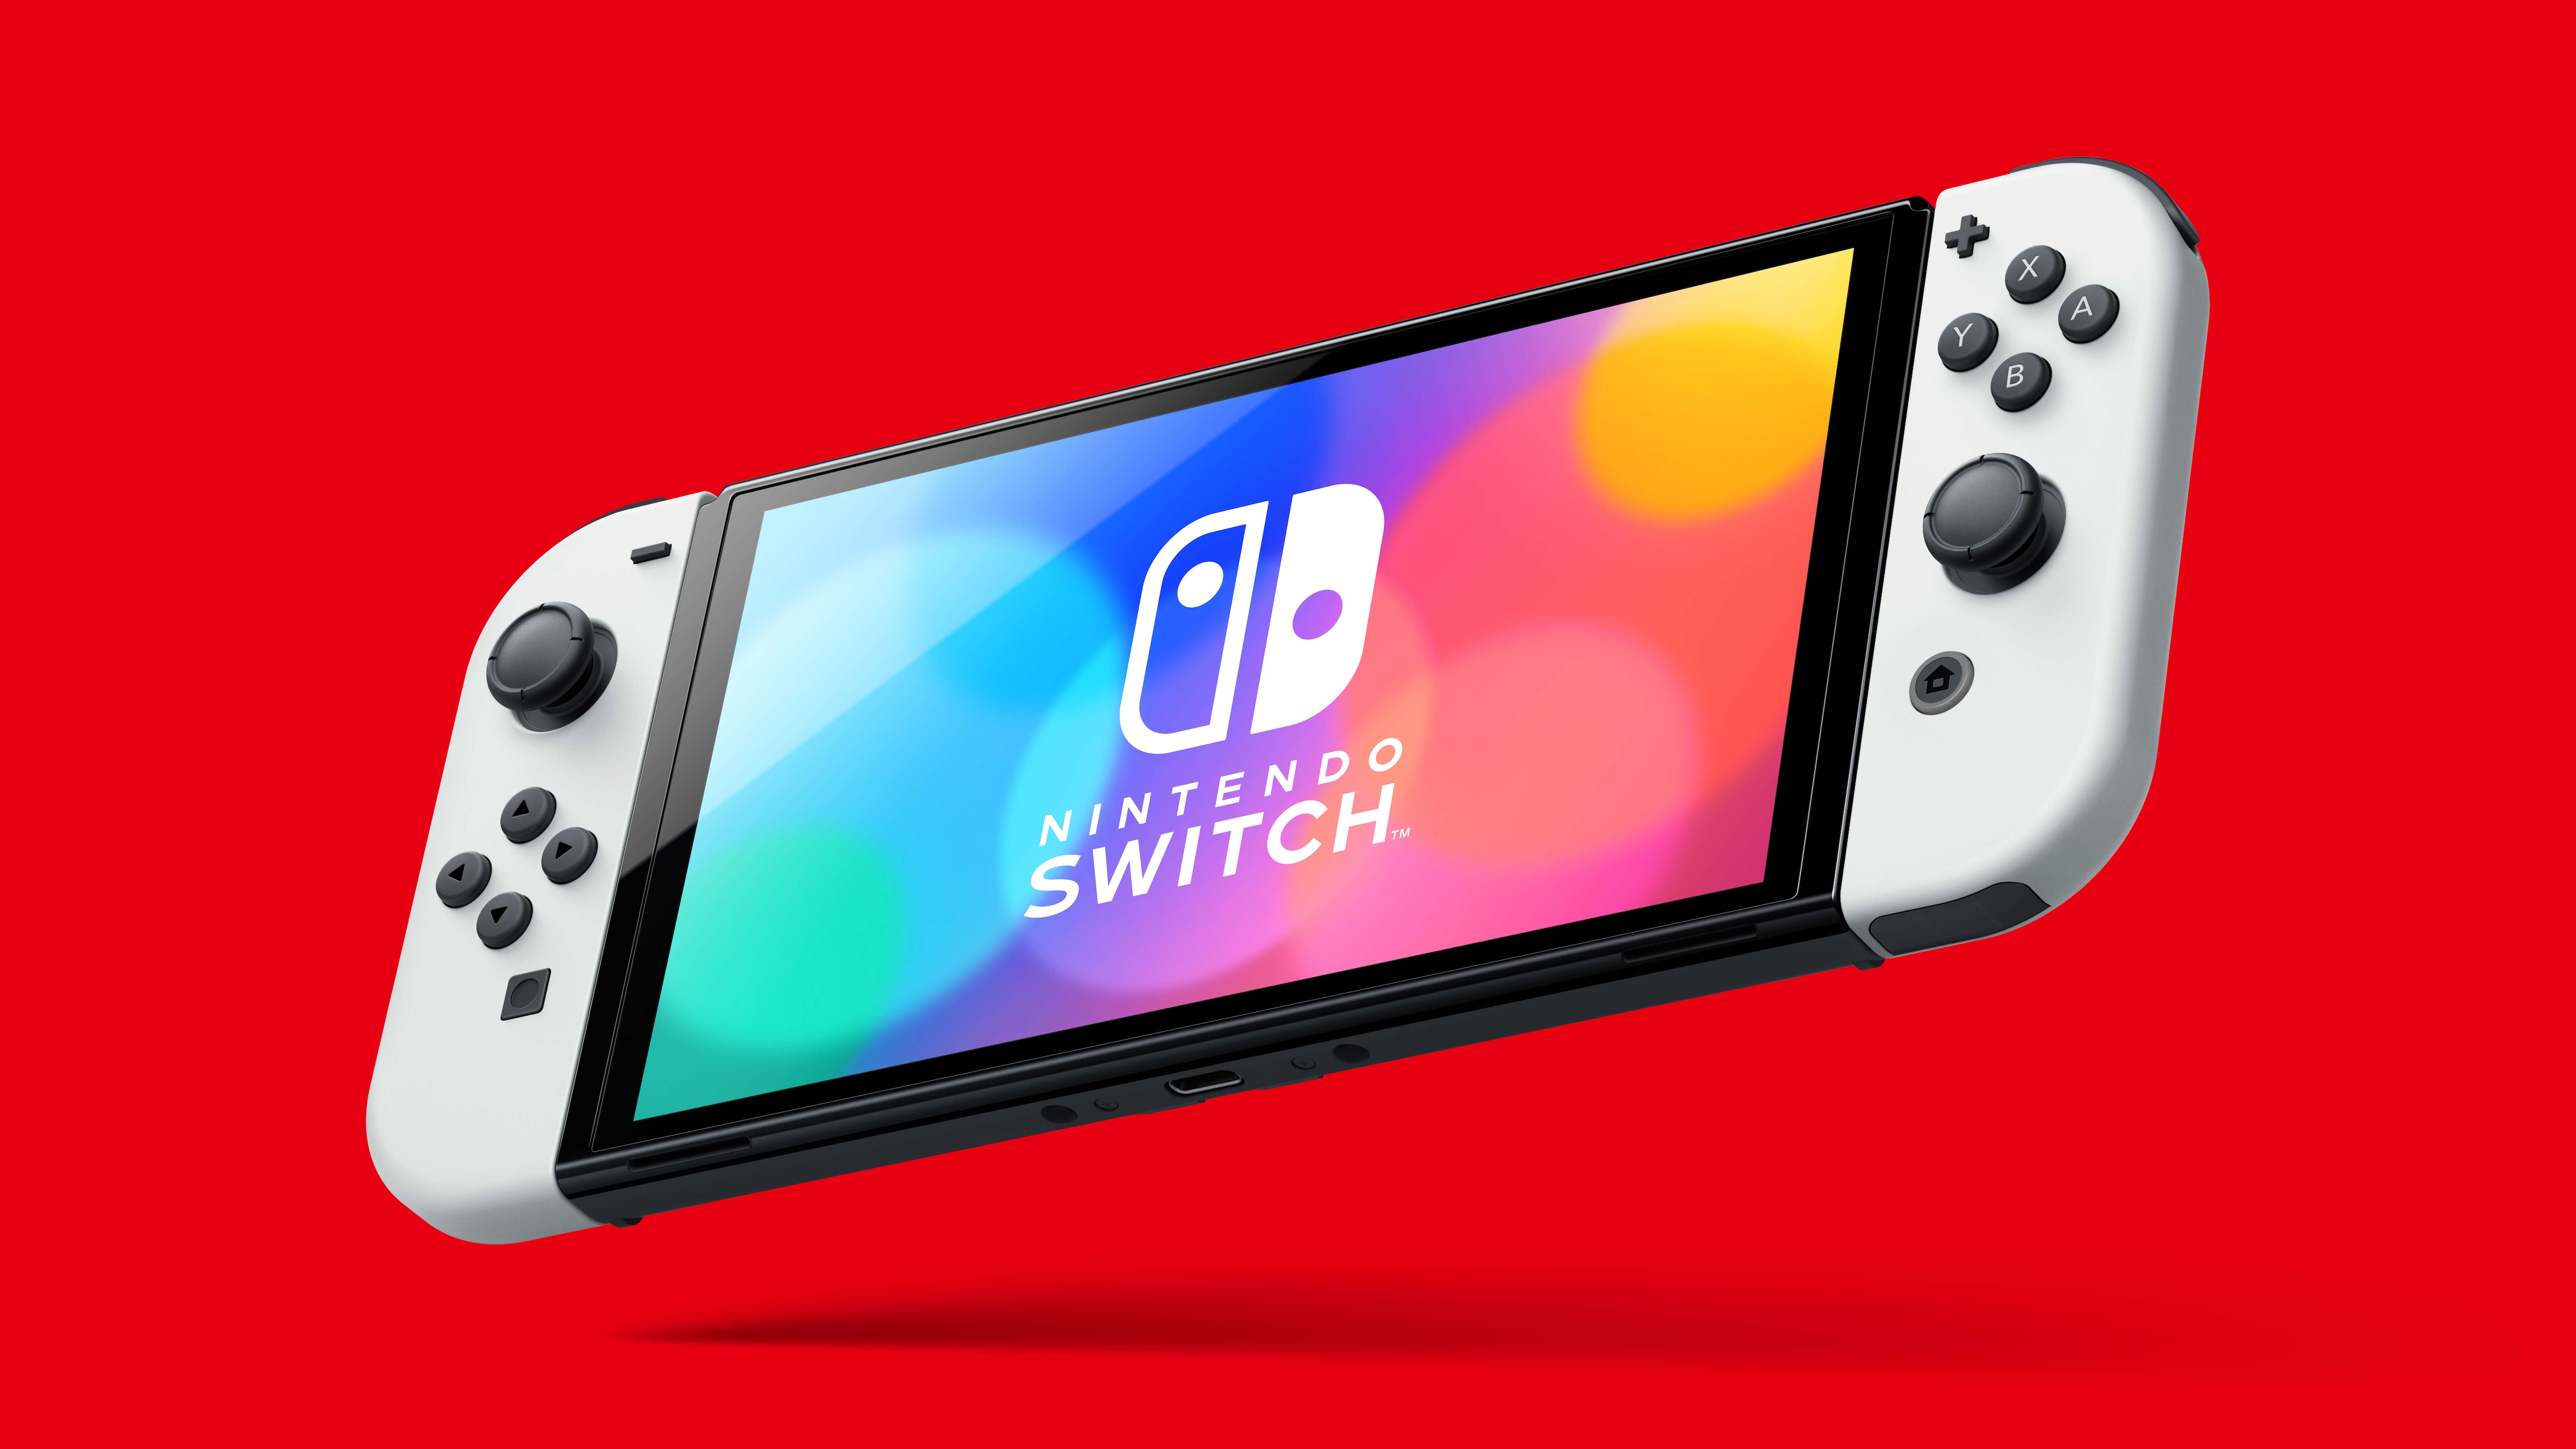 New Nintendo Switch OLED Console + Free Games + Neon Joy Con Controllers